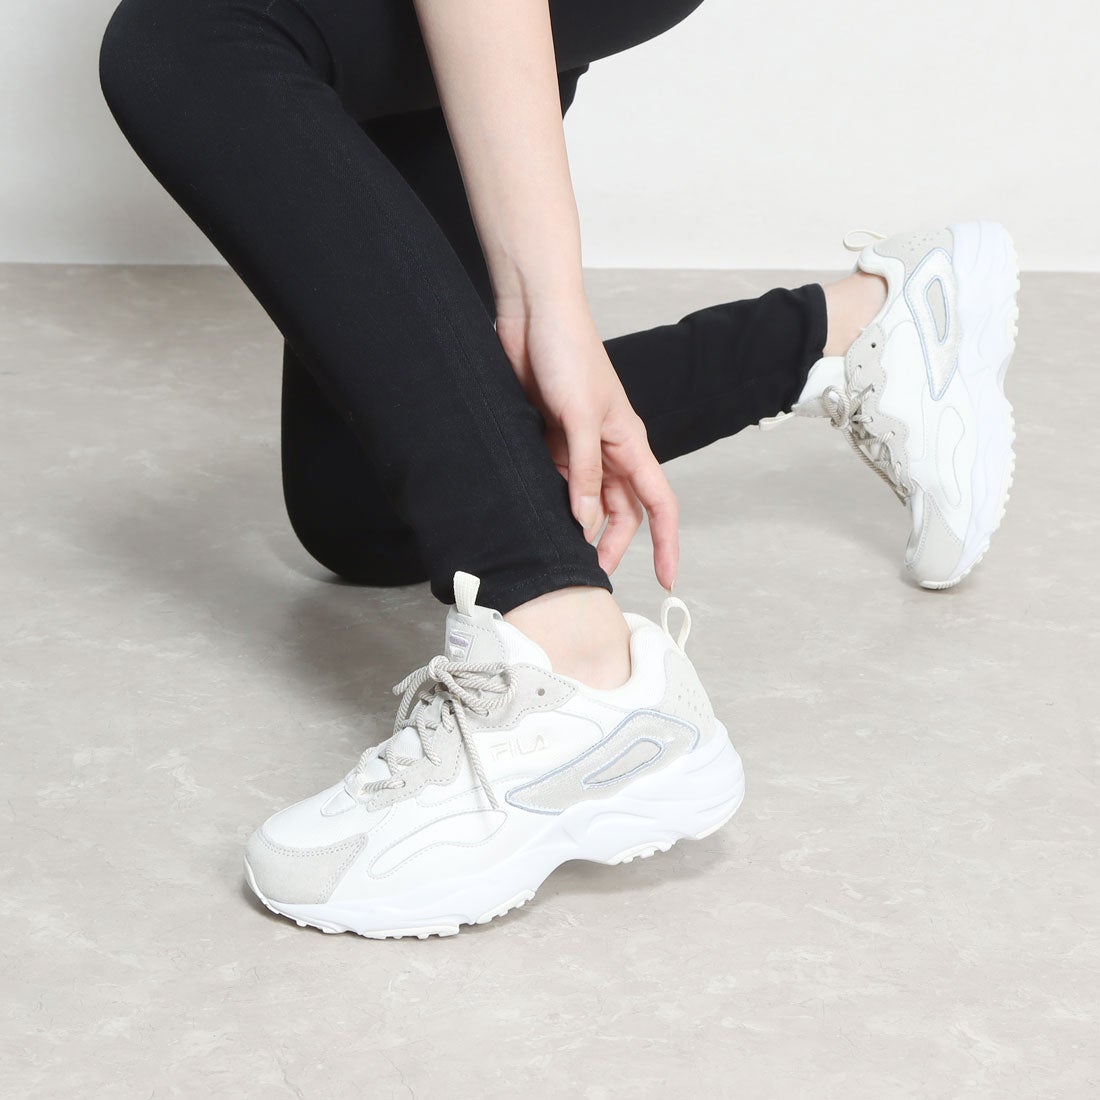 BE:FIRST 着用モデル】 フィラ FILA RAY TRACER GRN-philia （bright white/snow white）  -アウトレット通販 ロコレット (LOCOLET)